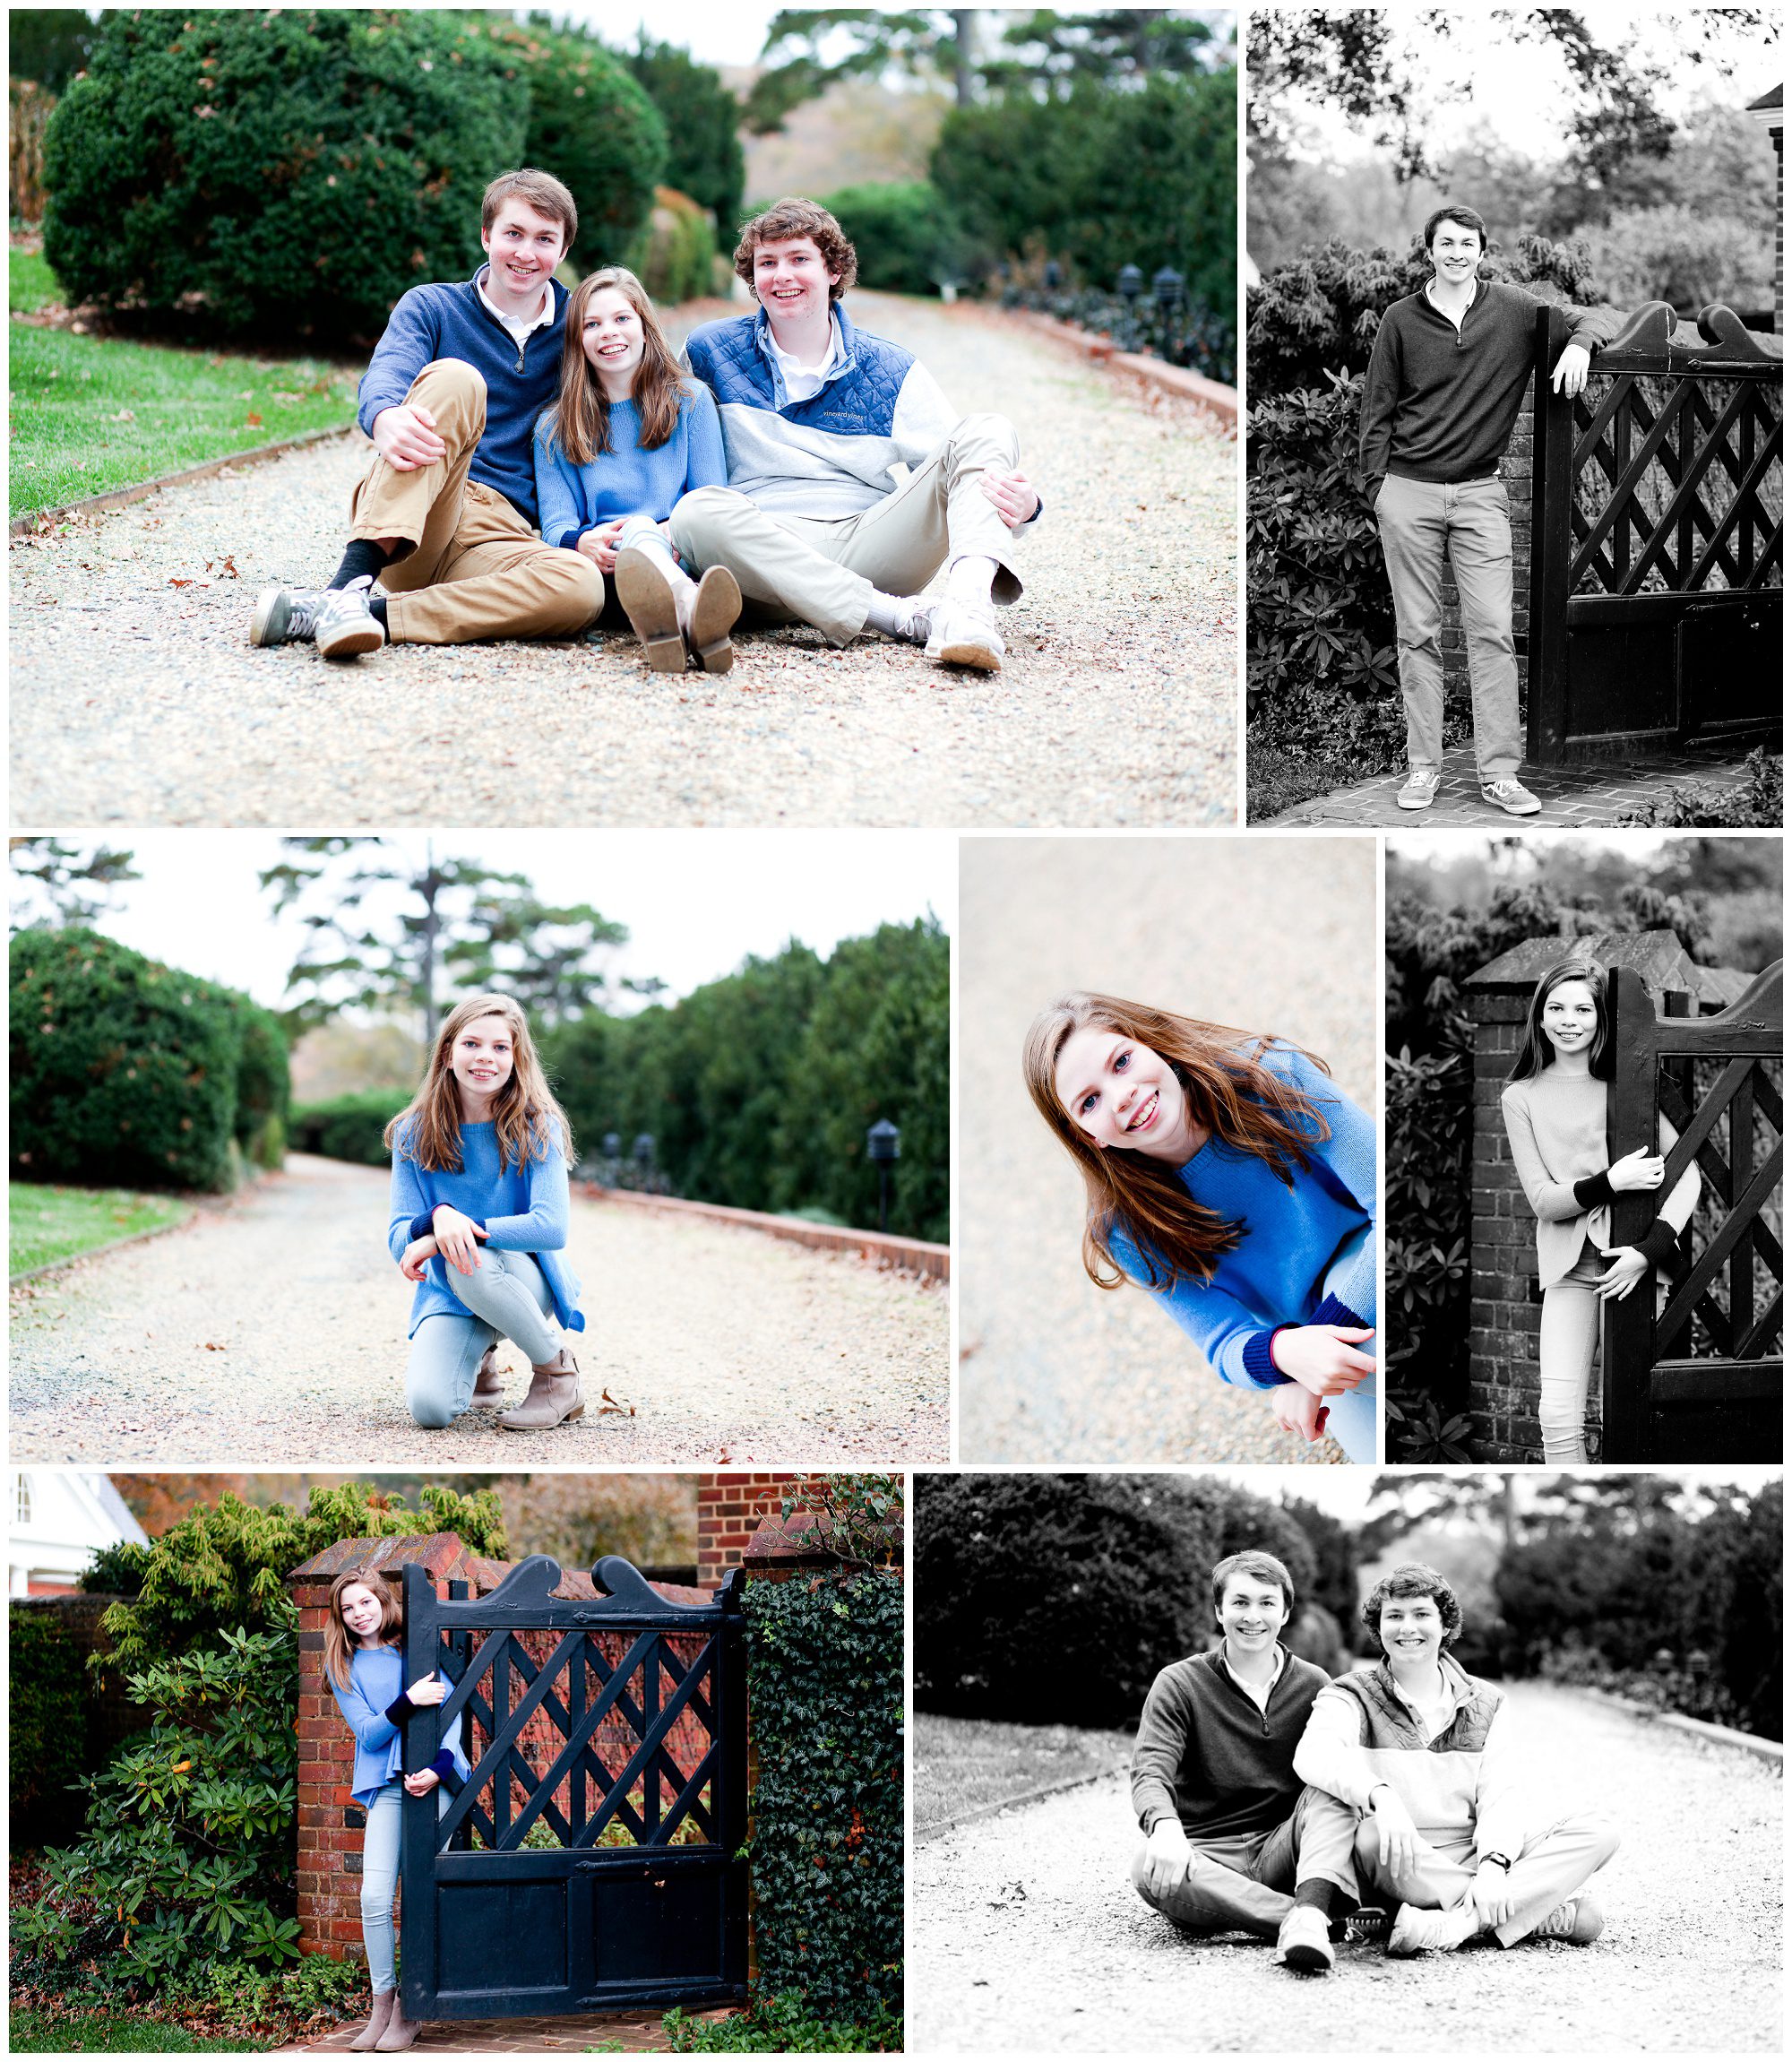 charlottesville family fall portraits albemarle county virginia photographer pictures teenagers siblings ivy